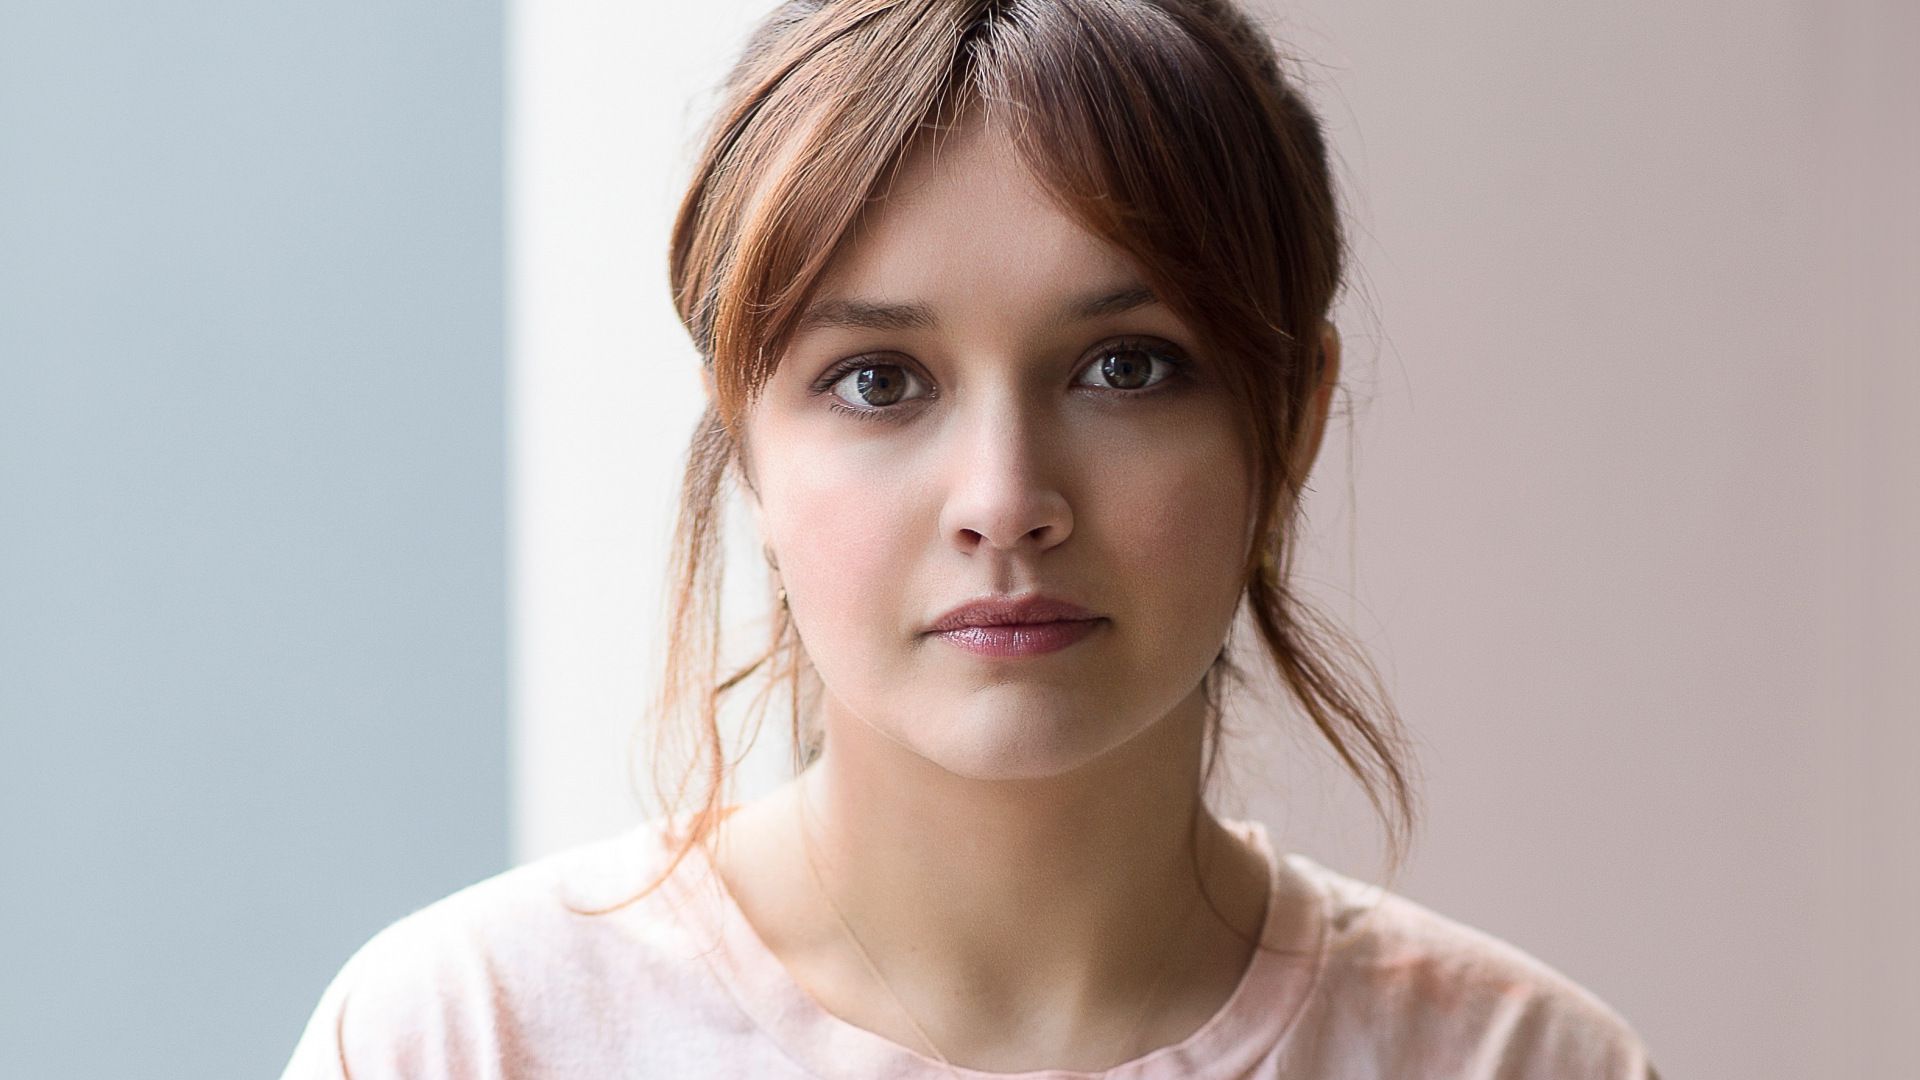 Olivia Cooke Height Feet Inches cm Weight Body Measurements